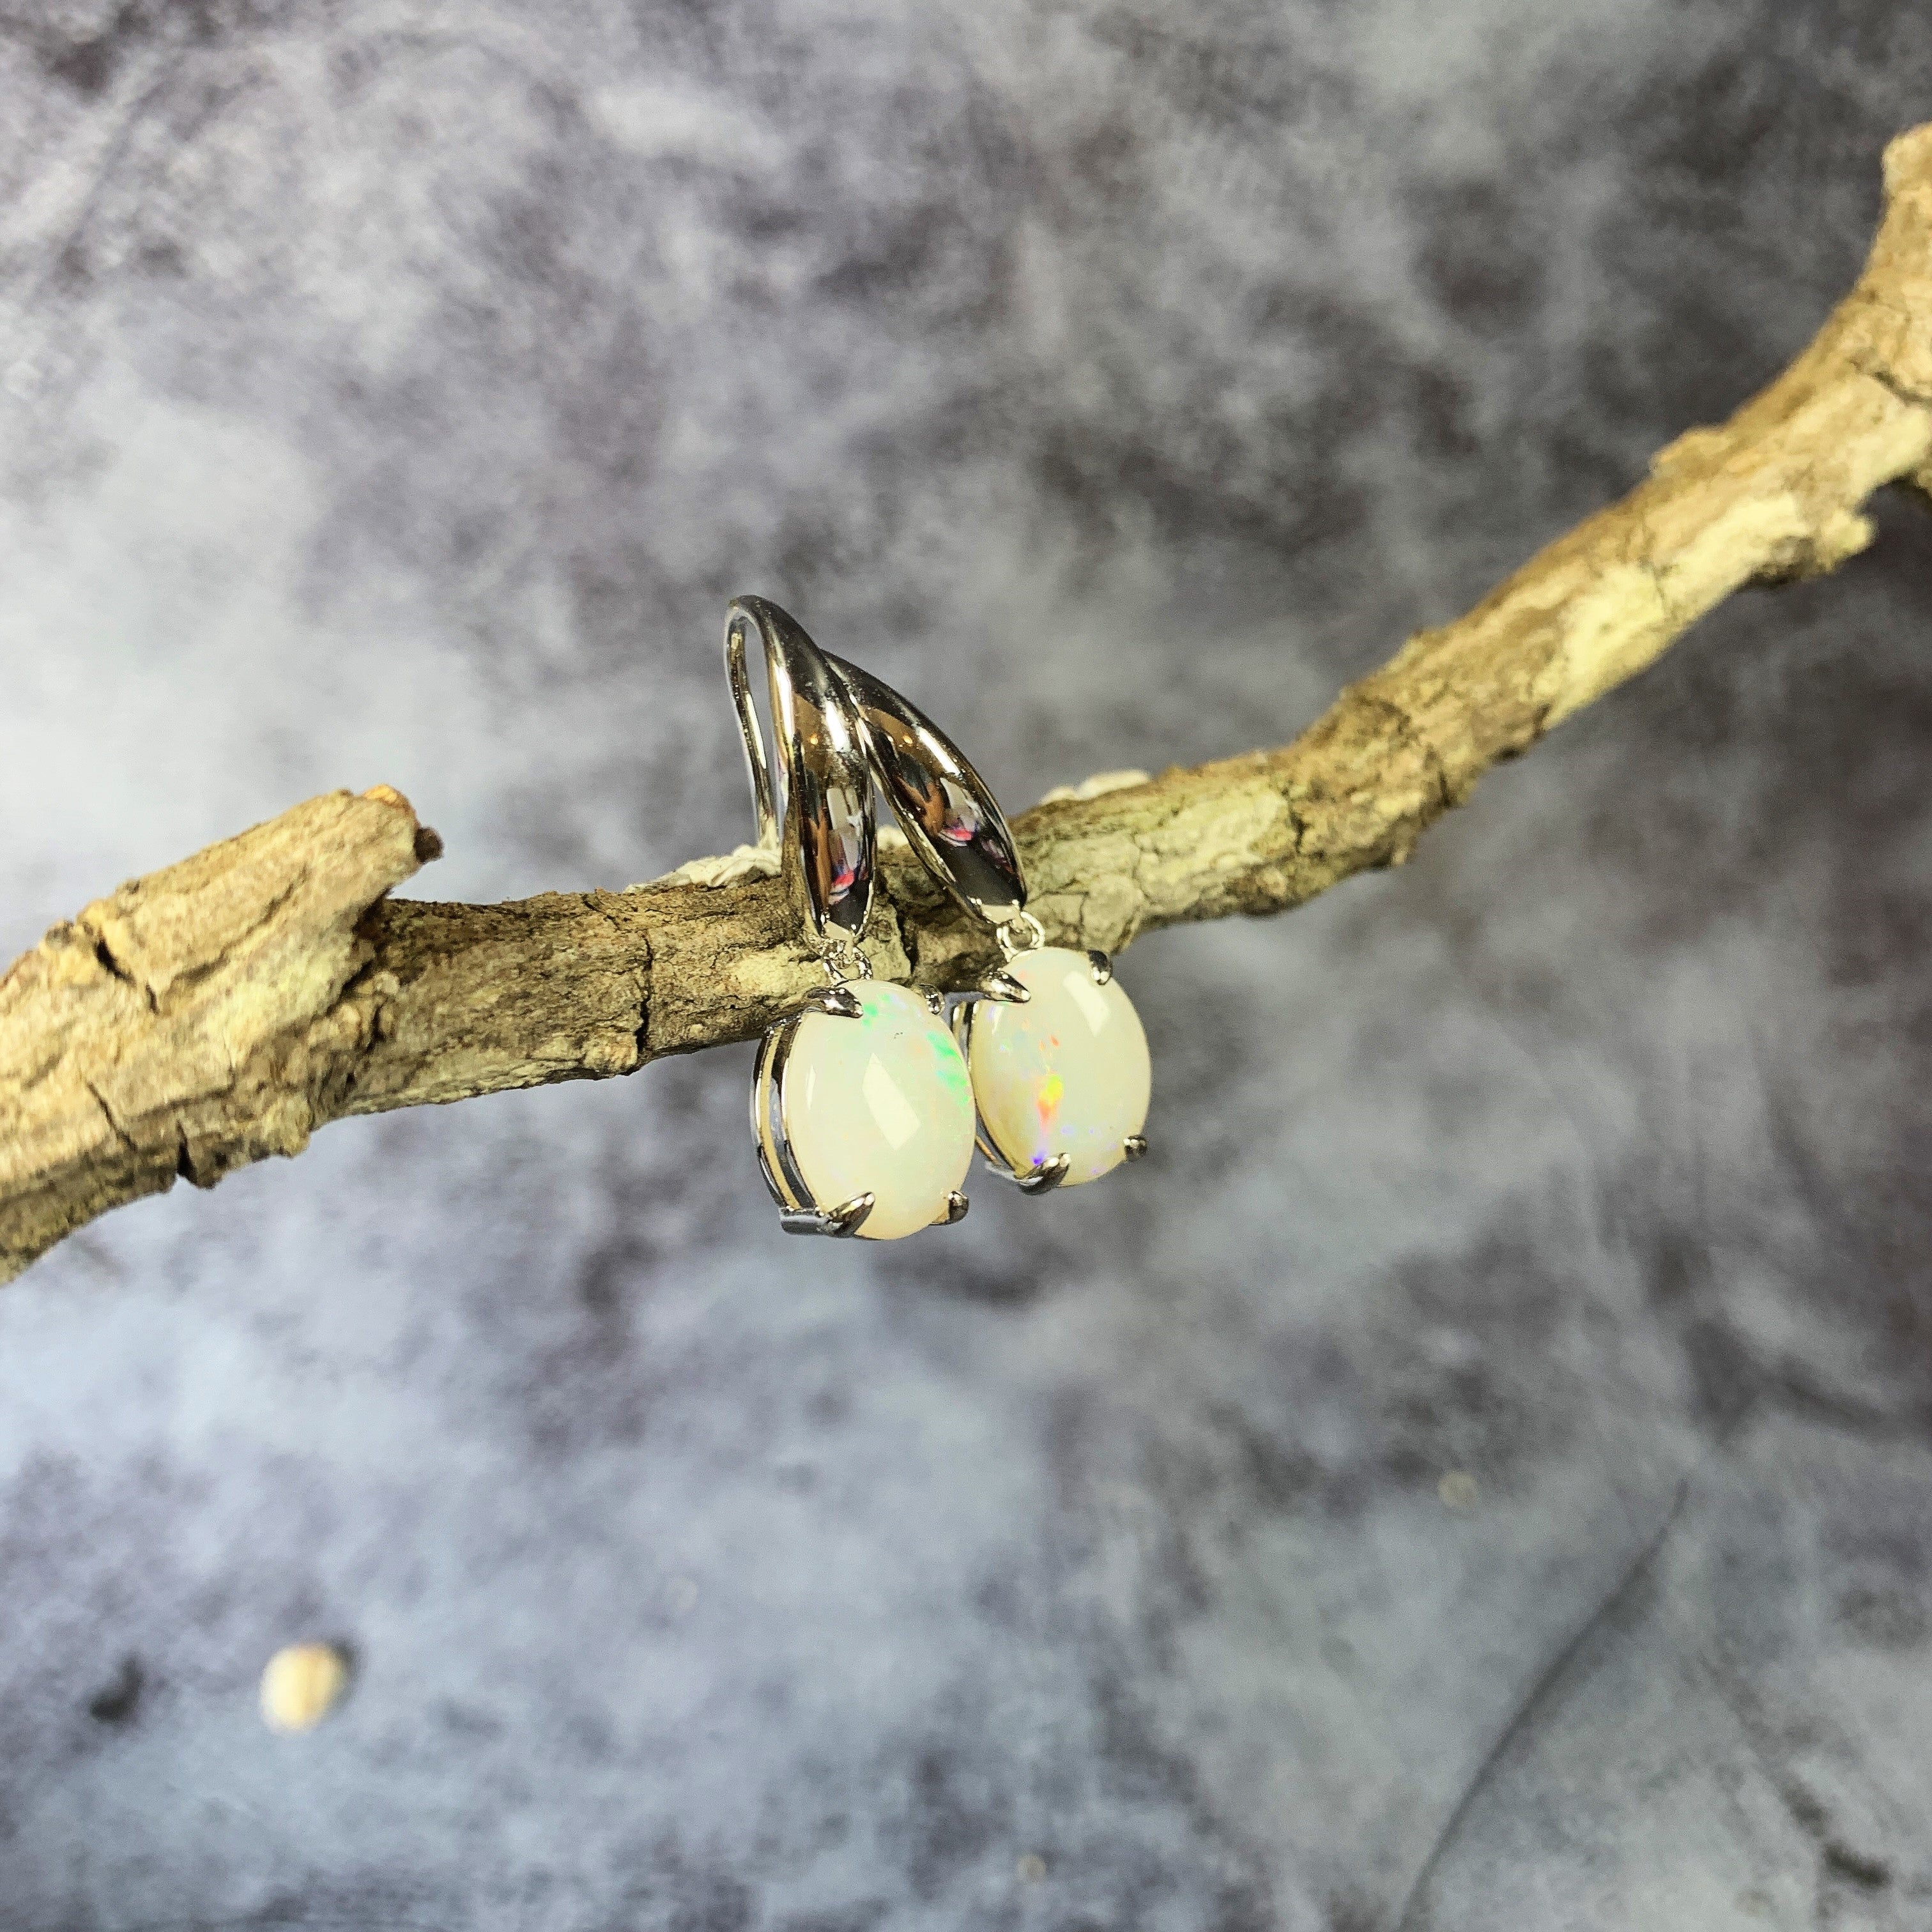 One Sterling Silver pair of dangling White 10x8mm Opals with hooks - Masterpiece Jewellery Opal & Gems Sydney Australia | Online Shop